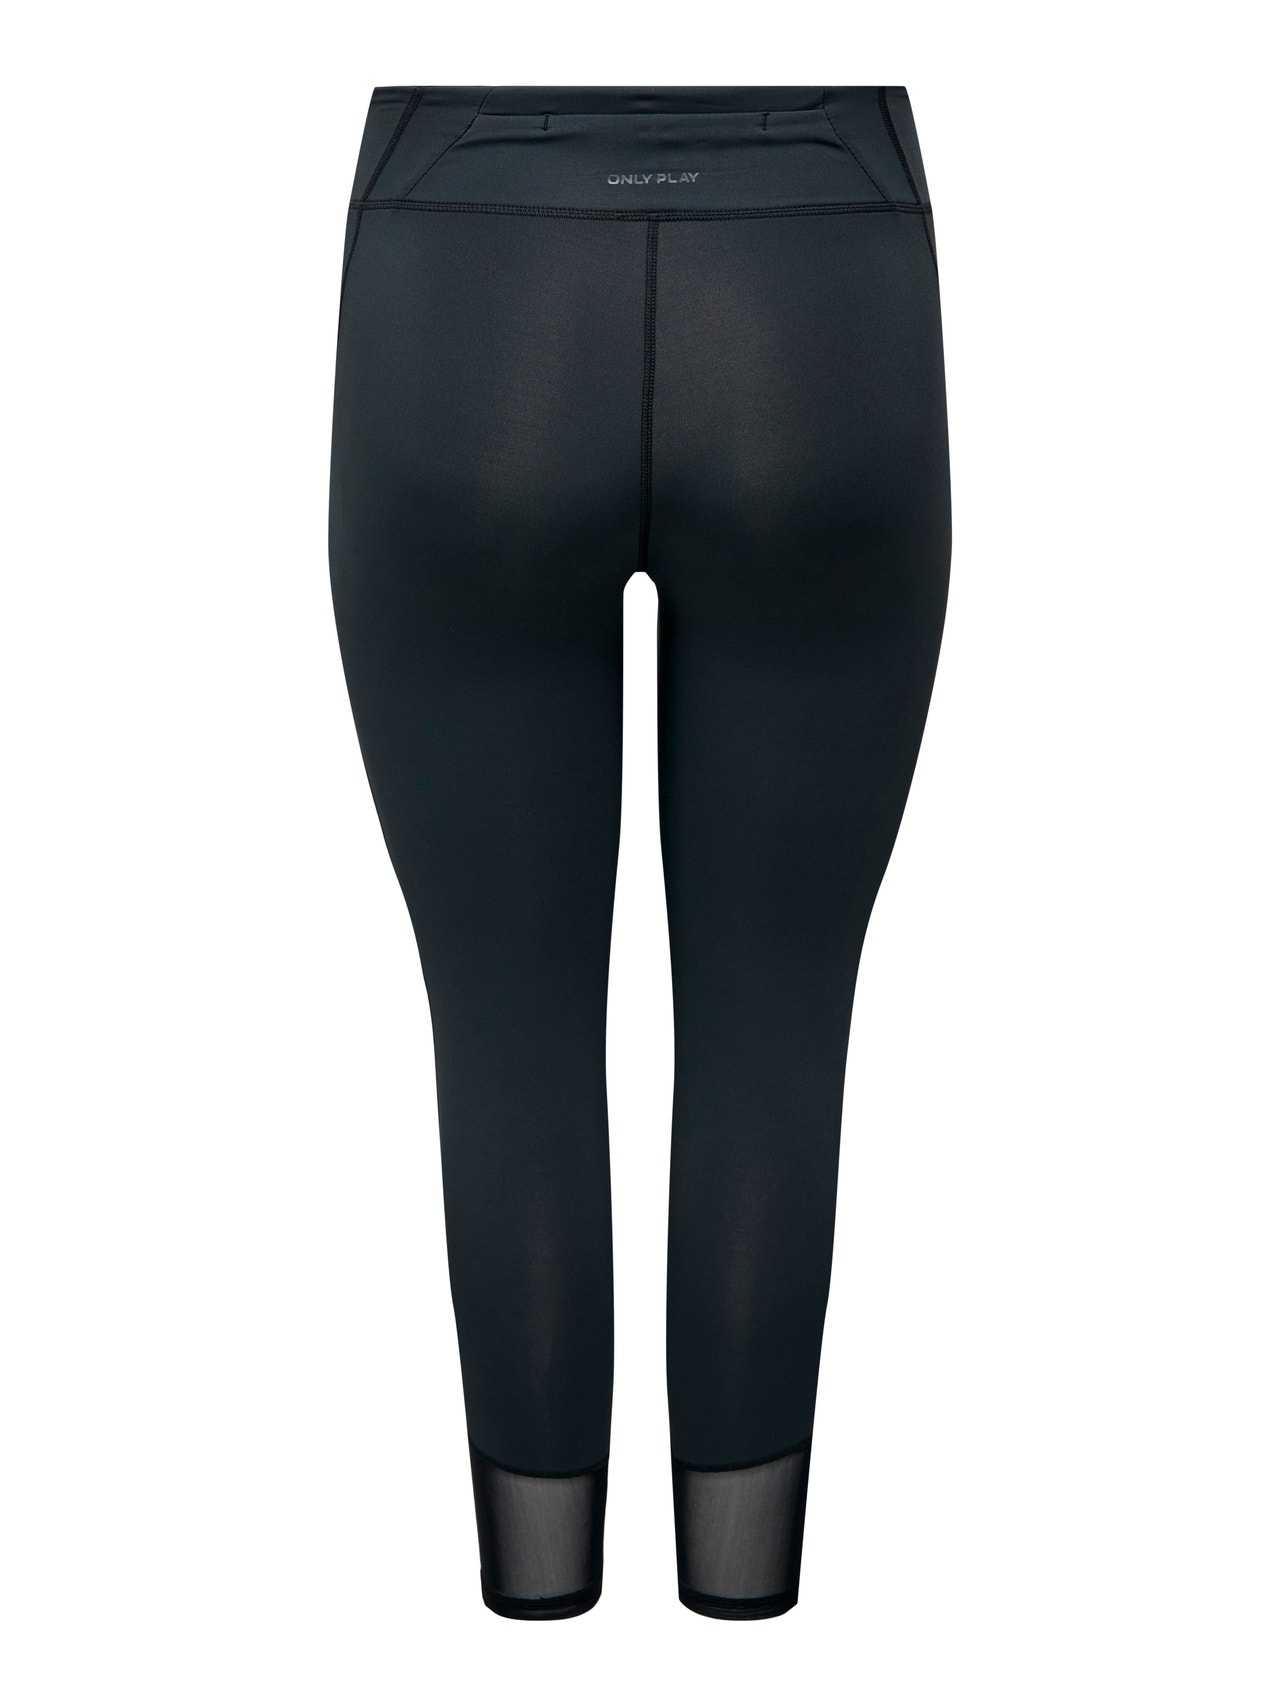 ONLY Tight fit High waist Curve Legging -Black - 15289014